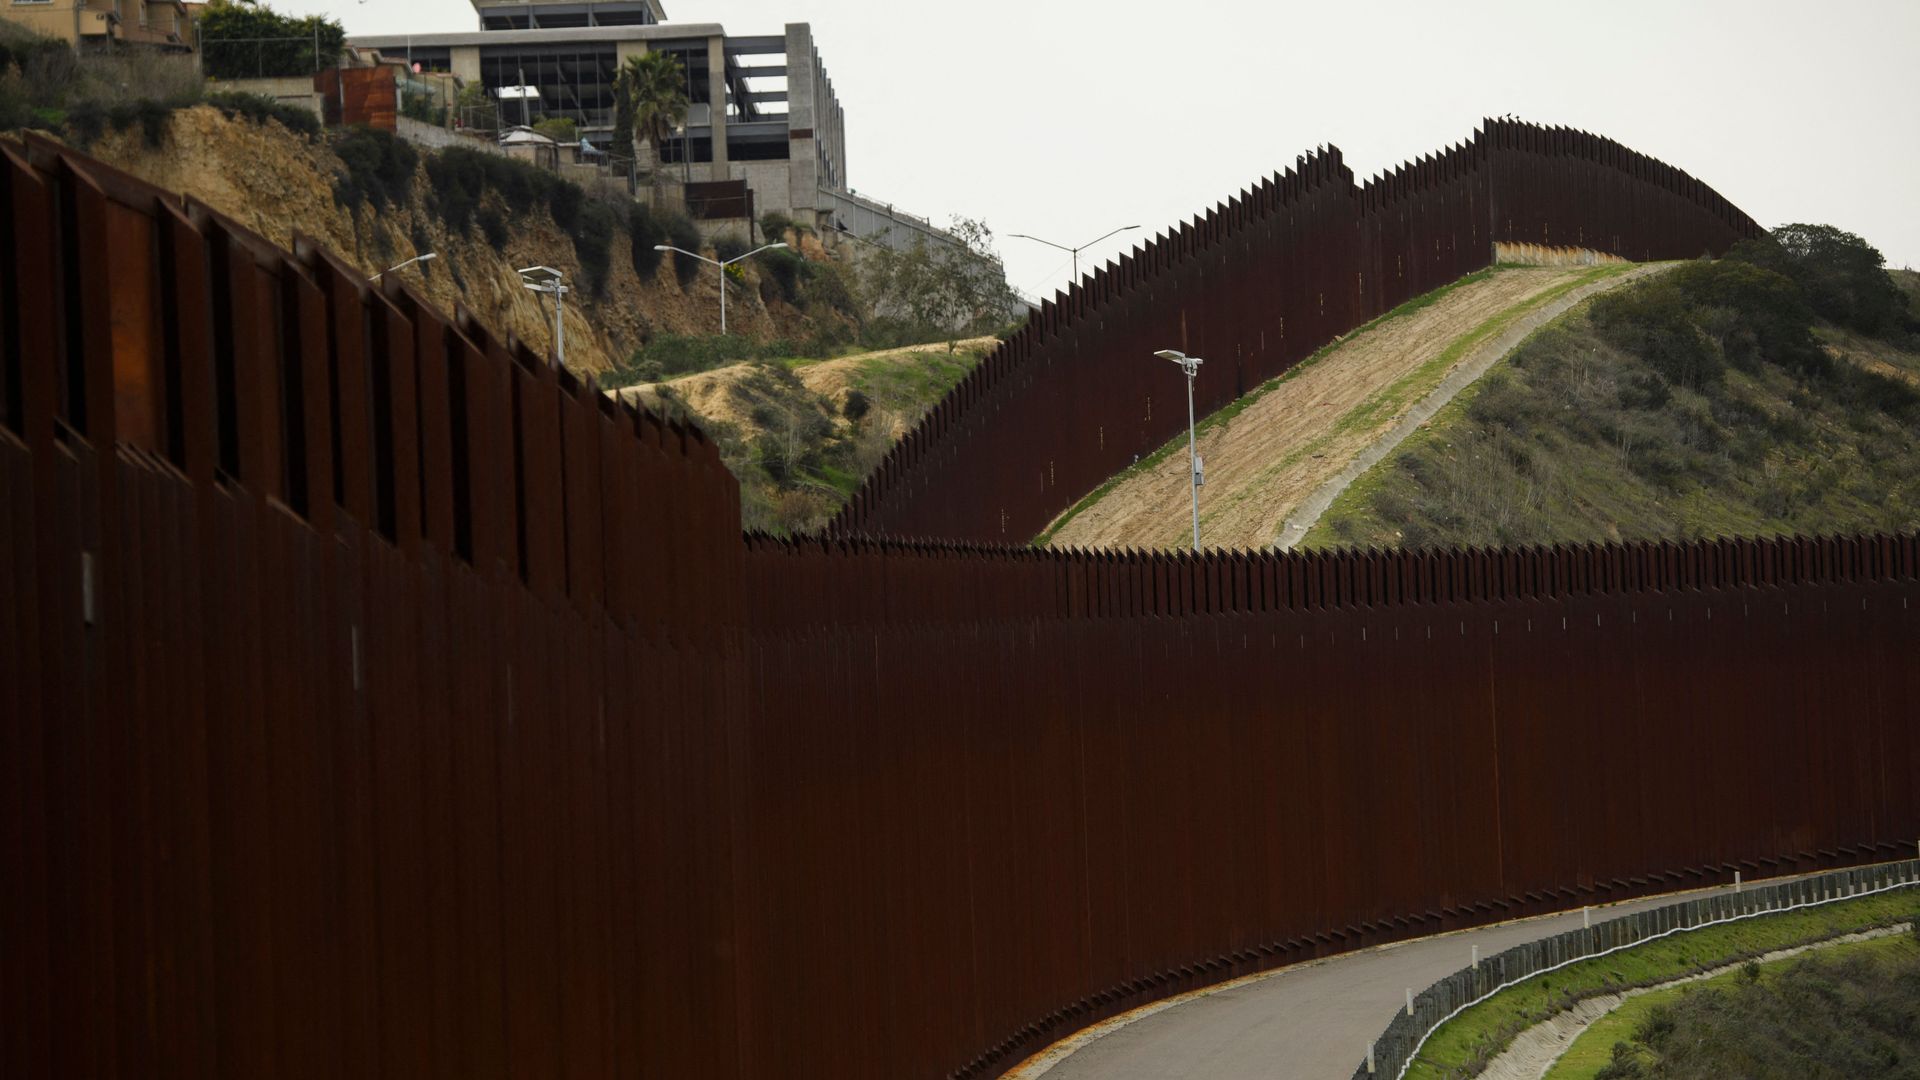 A section of the US-Mexico border wall between San Diego (R) and Tijuana (L) on January 12, 2022 in San Diego County, California.